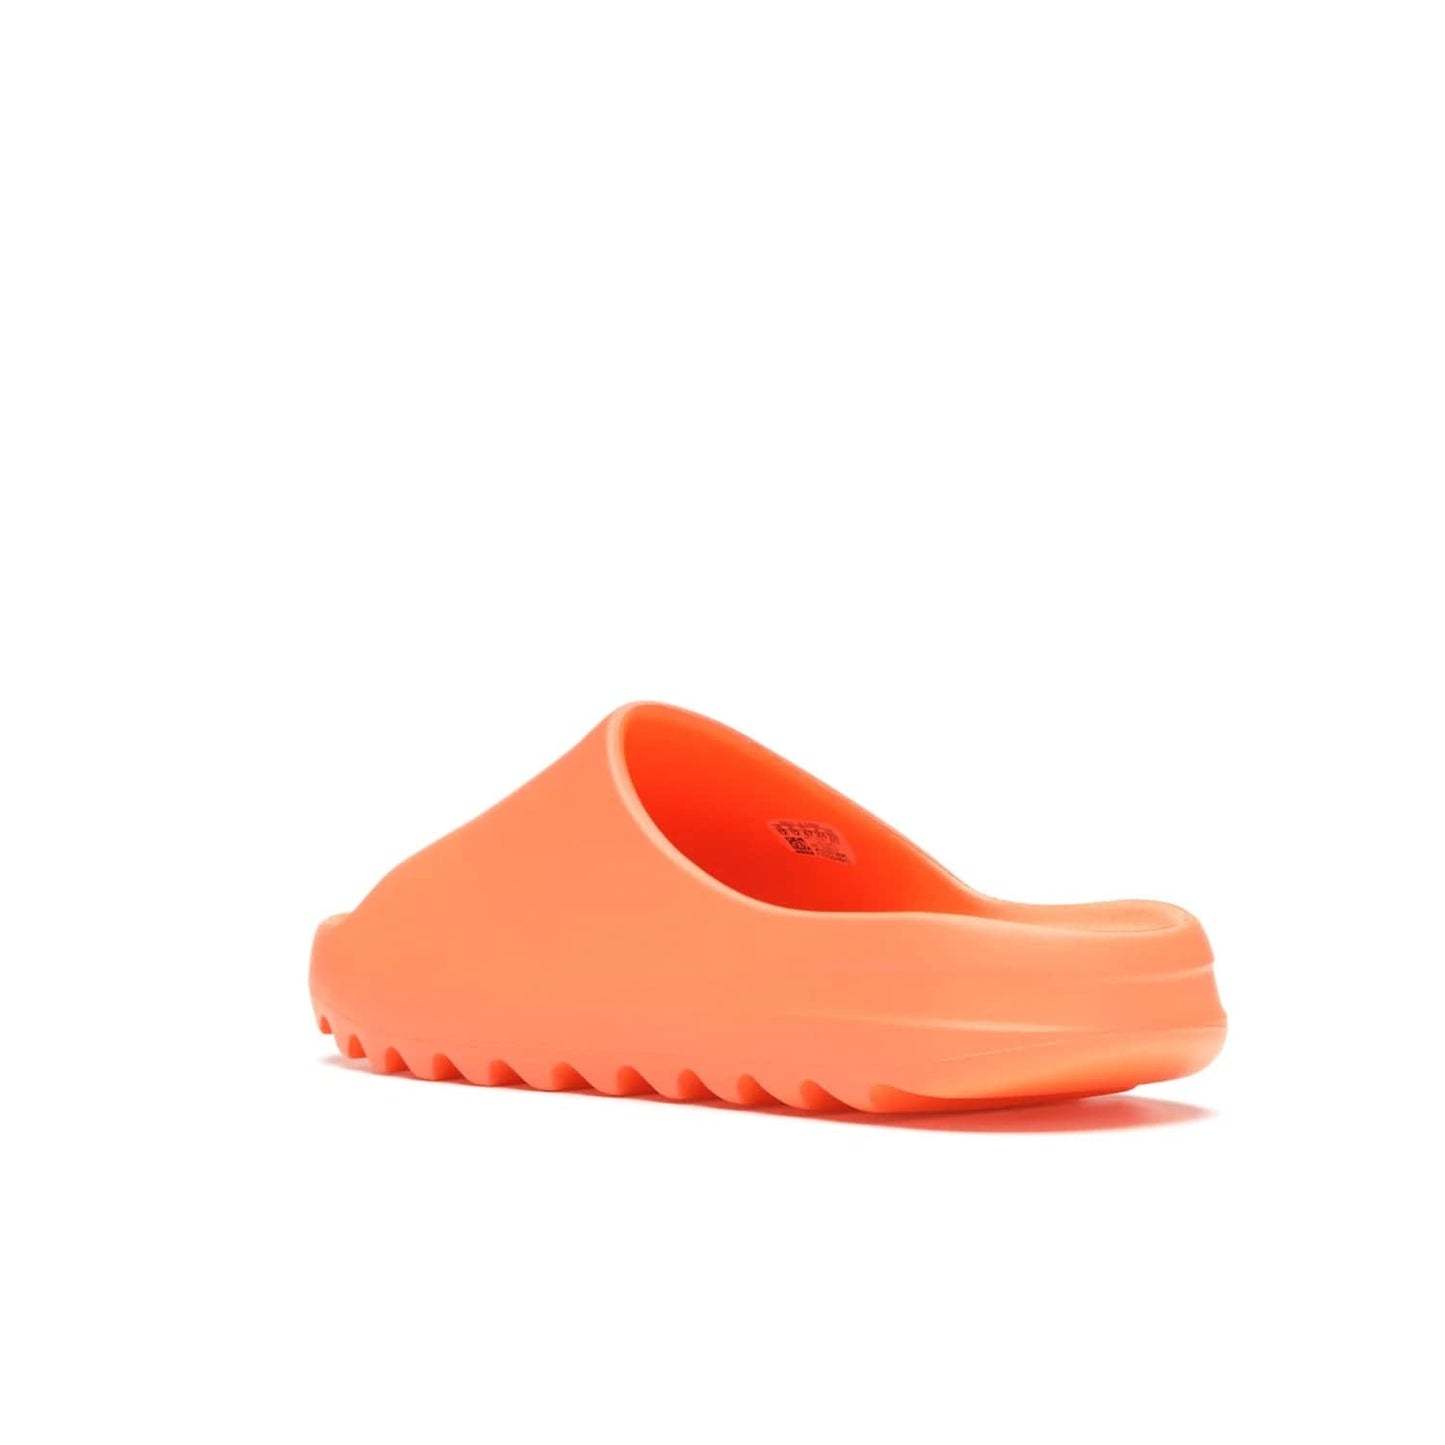 adidas Yeezy Slide Enflame Orange - Image 24 - Only at www.BallersClubKickz.com - Limited edition adidas Yeezy Slide featuring a bold Enflame Orange upper and EVA foam construction. Grooved outsole for traction and support. Released June 2021. Perfect for summer.